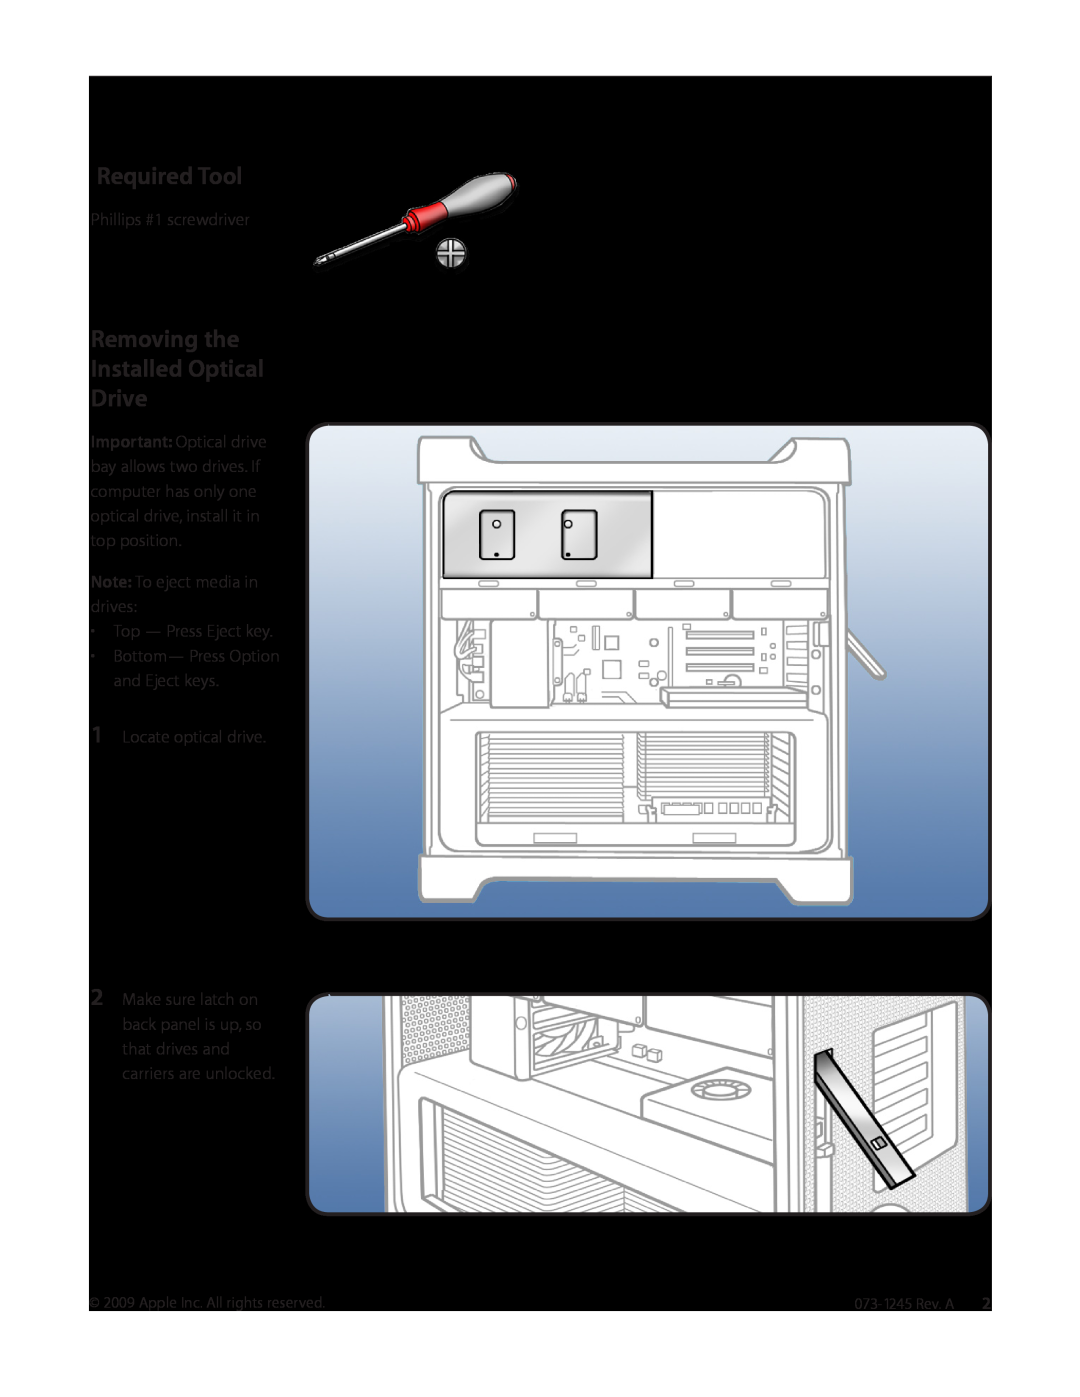 Apple warranty Required Tool, Removing the Installed Optical Drive, Phillips #1 screwdriver, Locate optical drive 